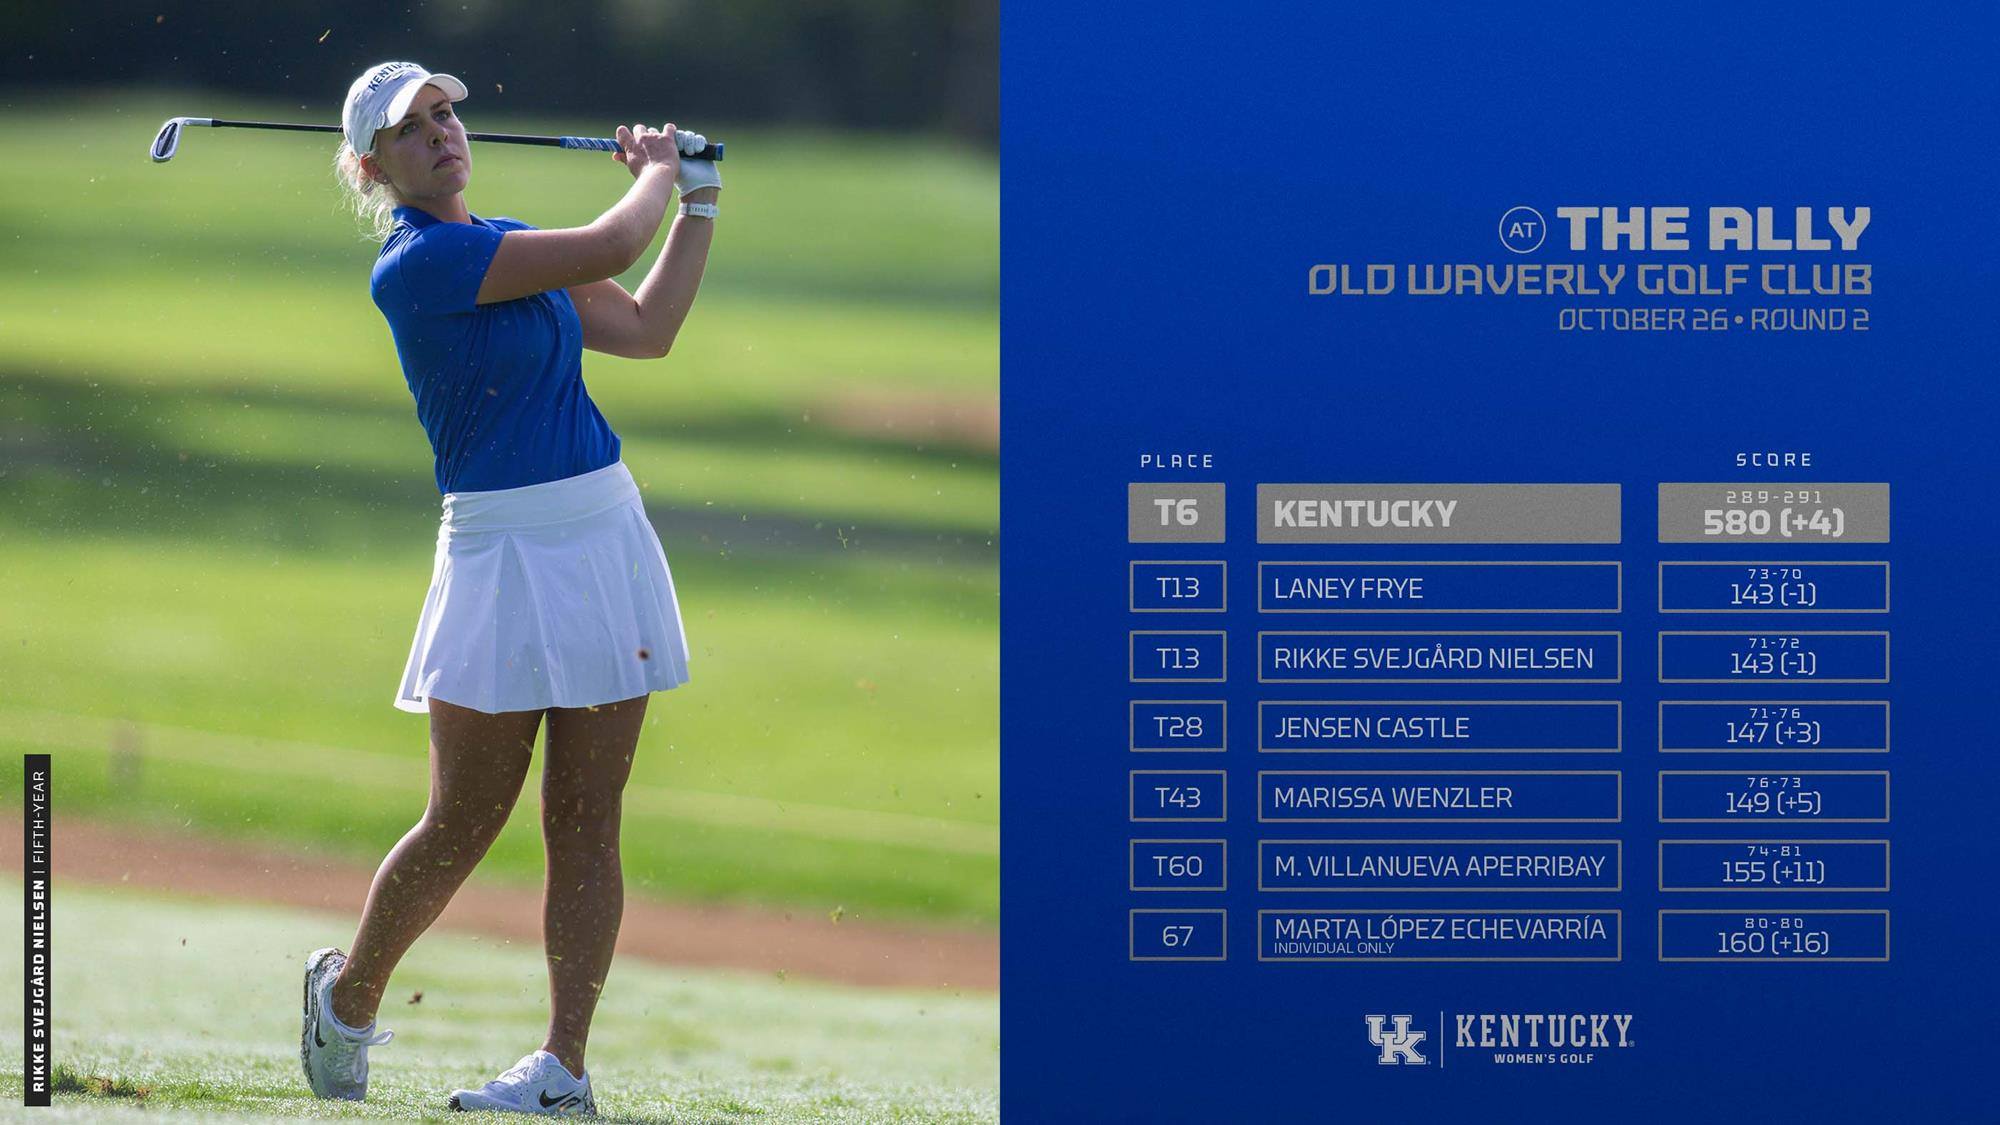 UK Women’s Golf Remains in Sixth Place Heading into Ally Finale